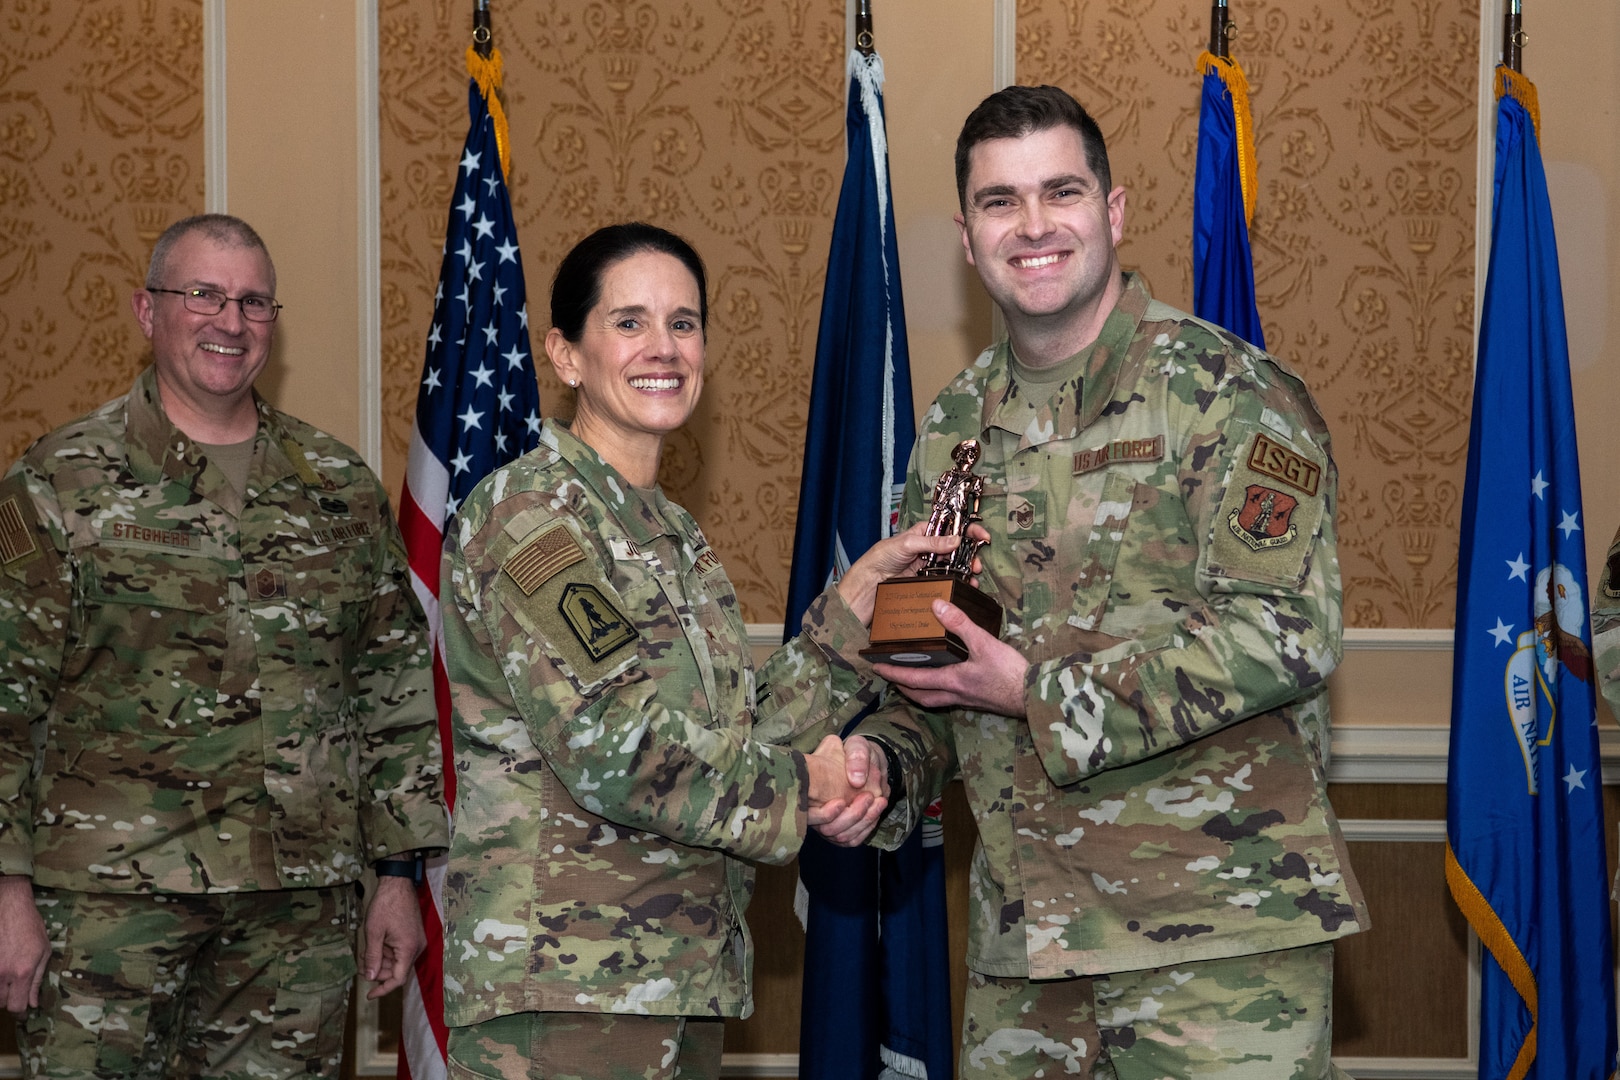 A general and Airman holding a trophy